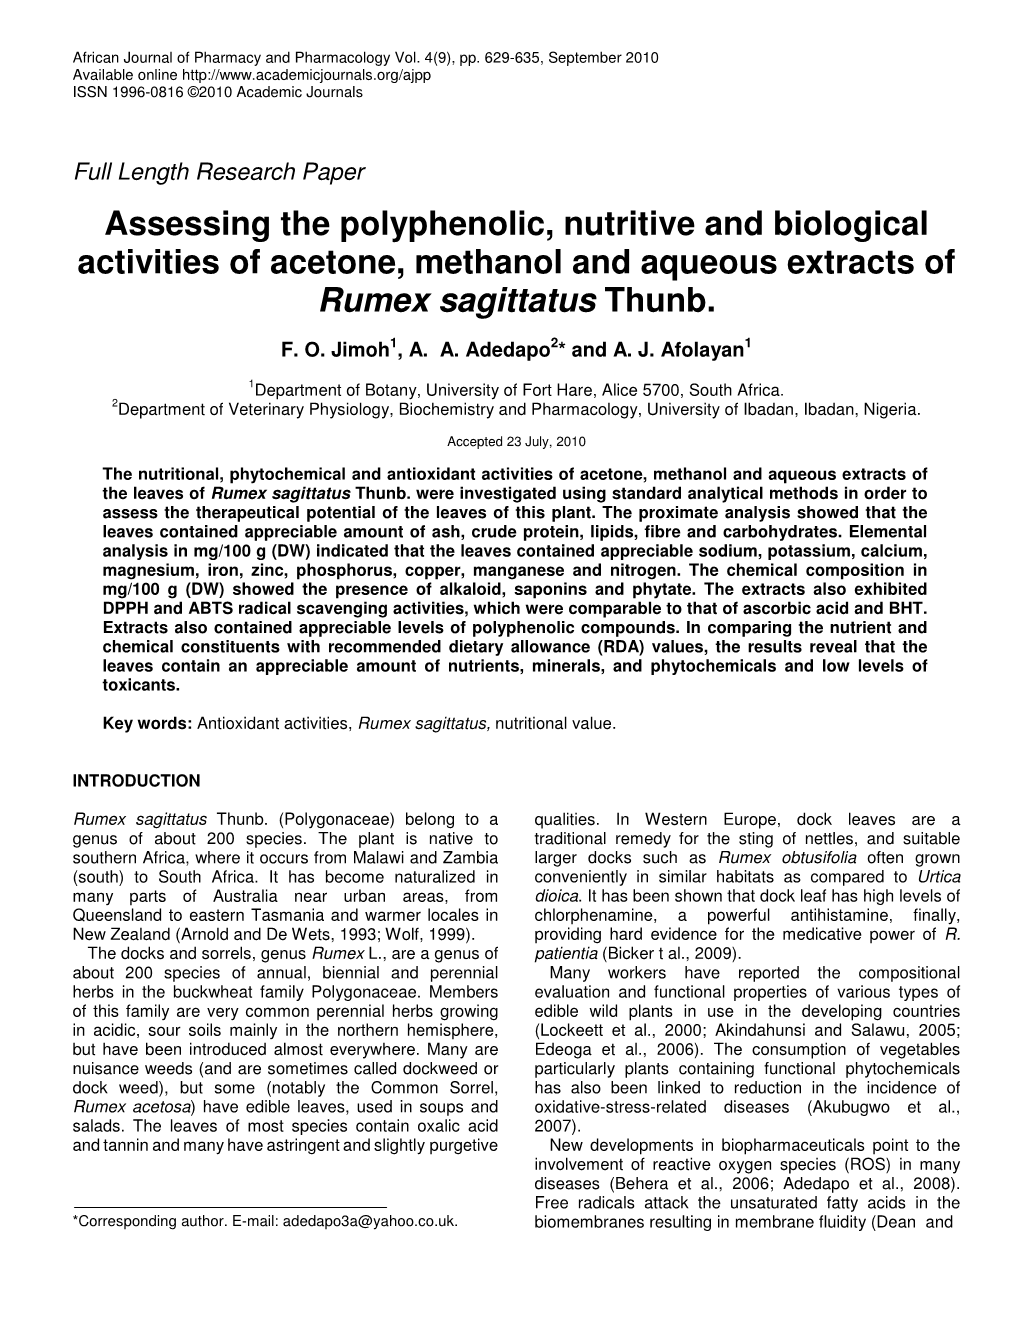 Assessing the Polyphenolic, Nutritive and Biological Activities of Acetone, Methanol and Aqueous Extracts of Rumex Sagittatus Thunb